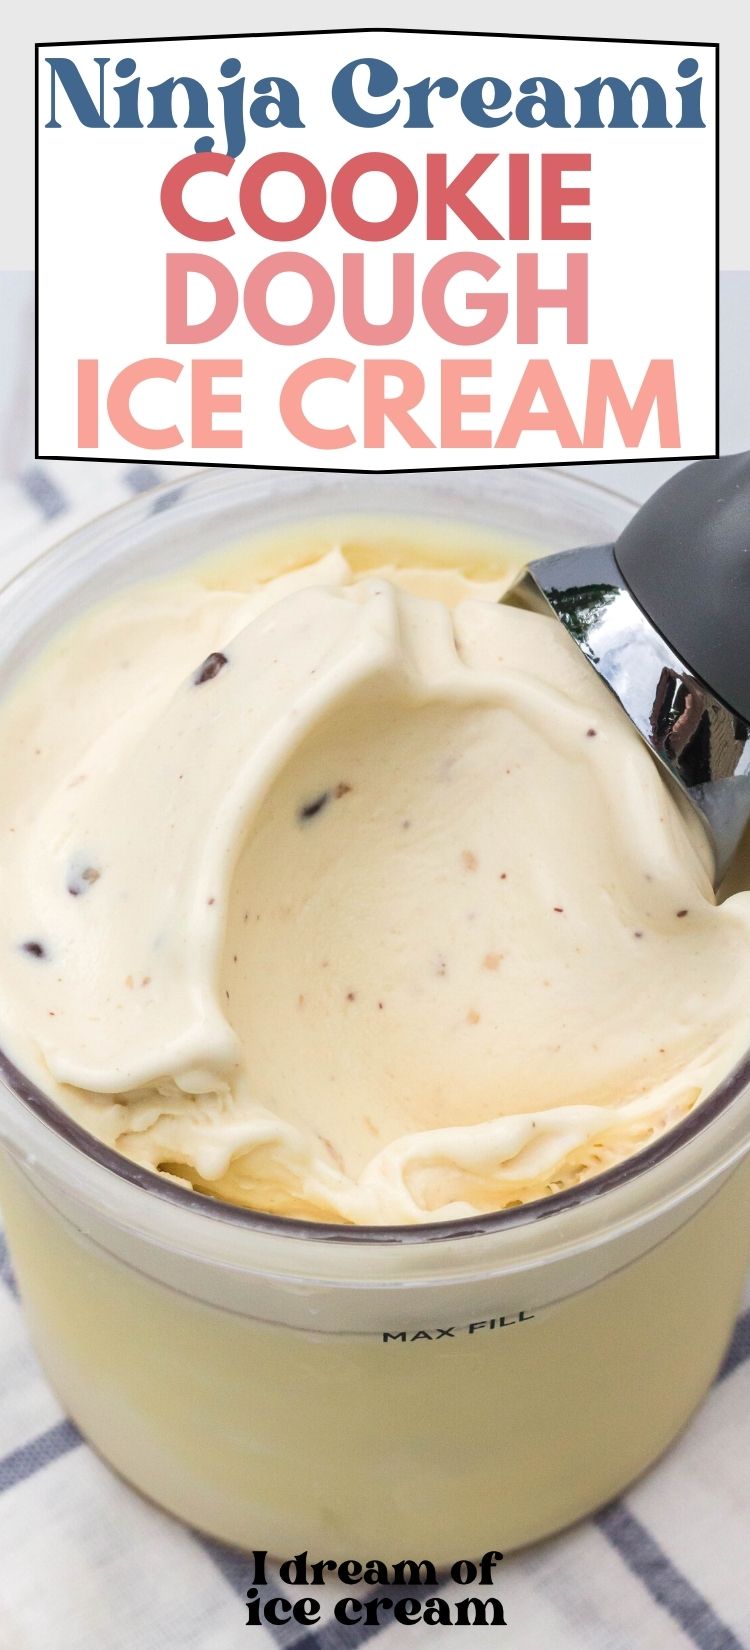 a Ninja Creami pint container of cookie dough ice cream, with a scoop in it.